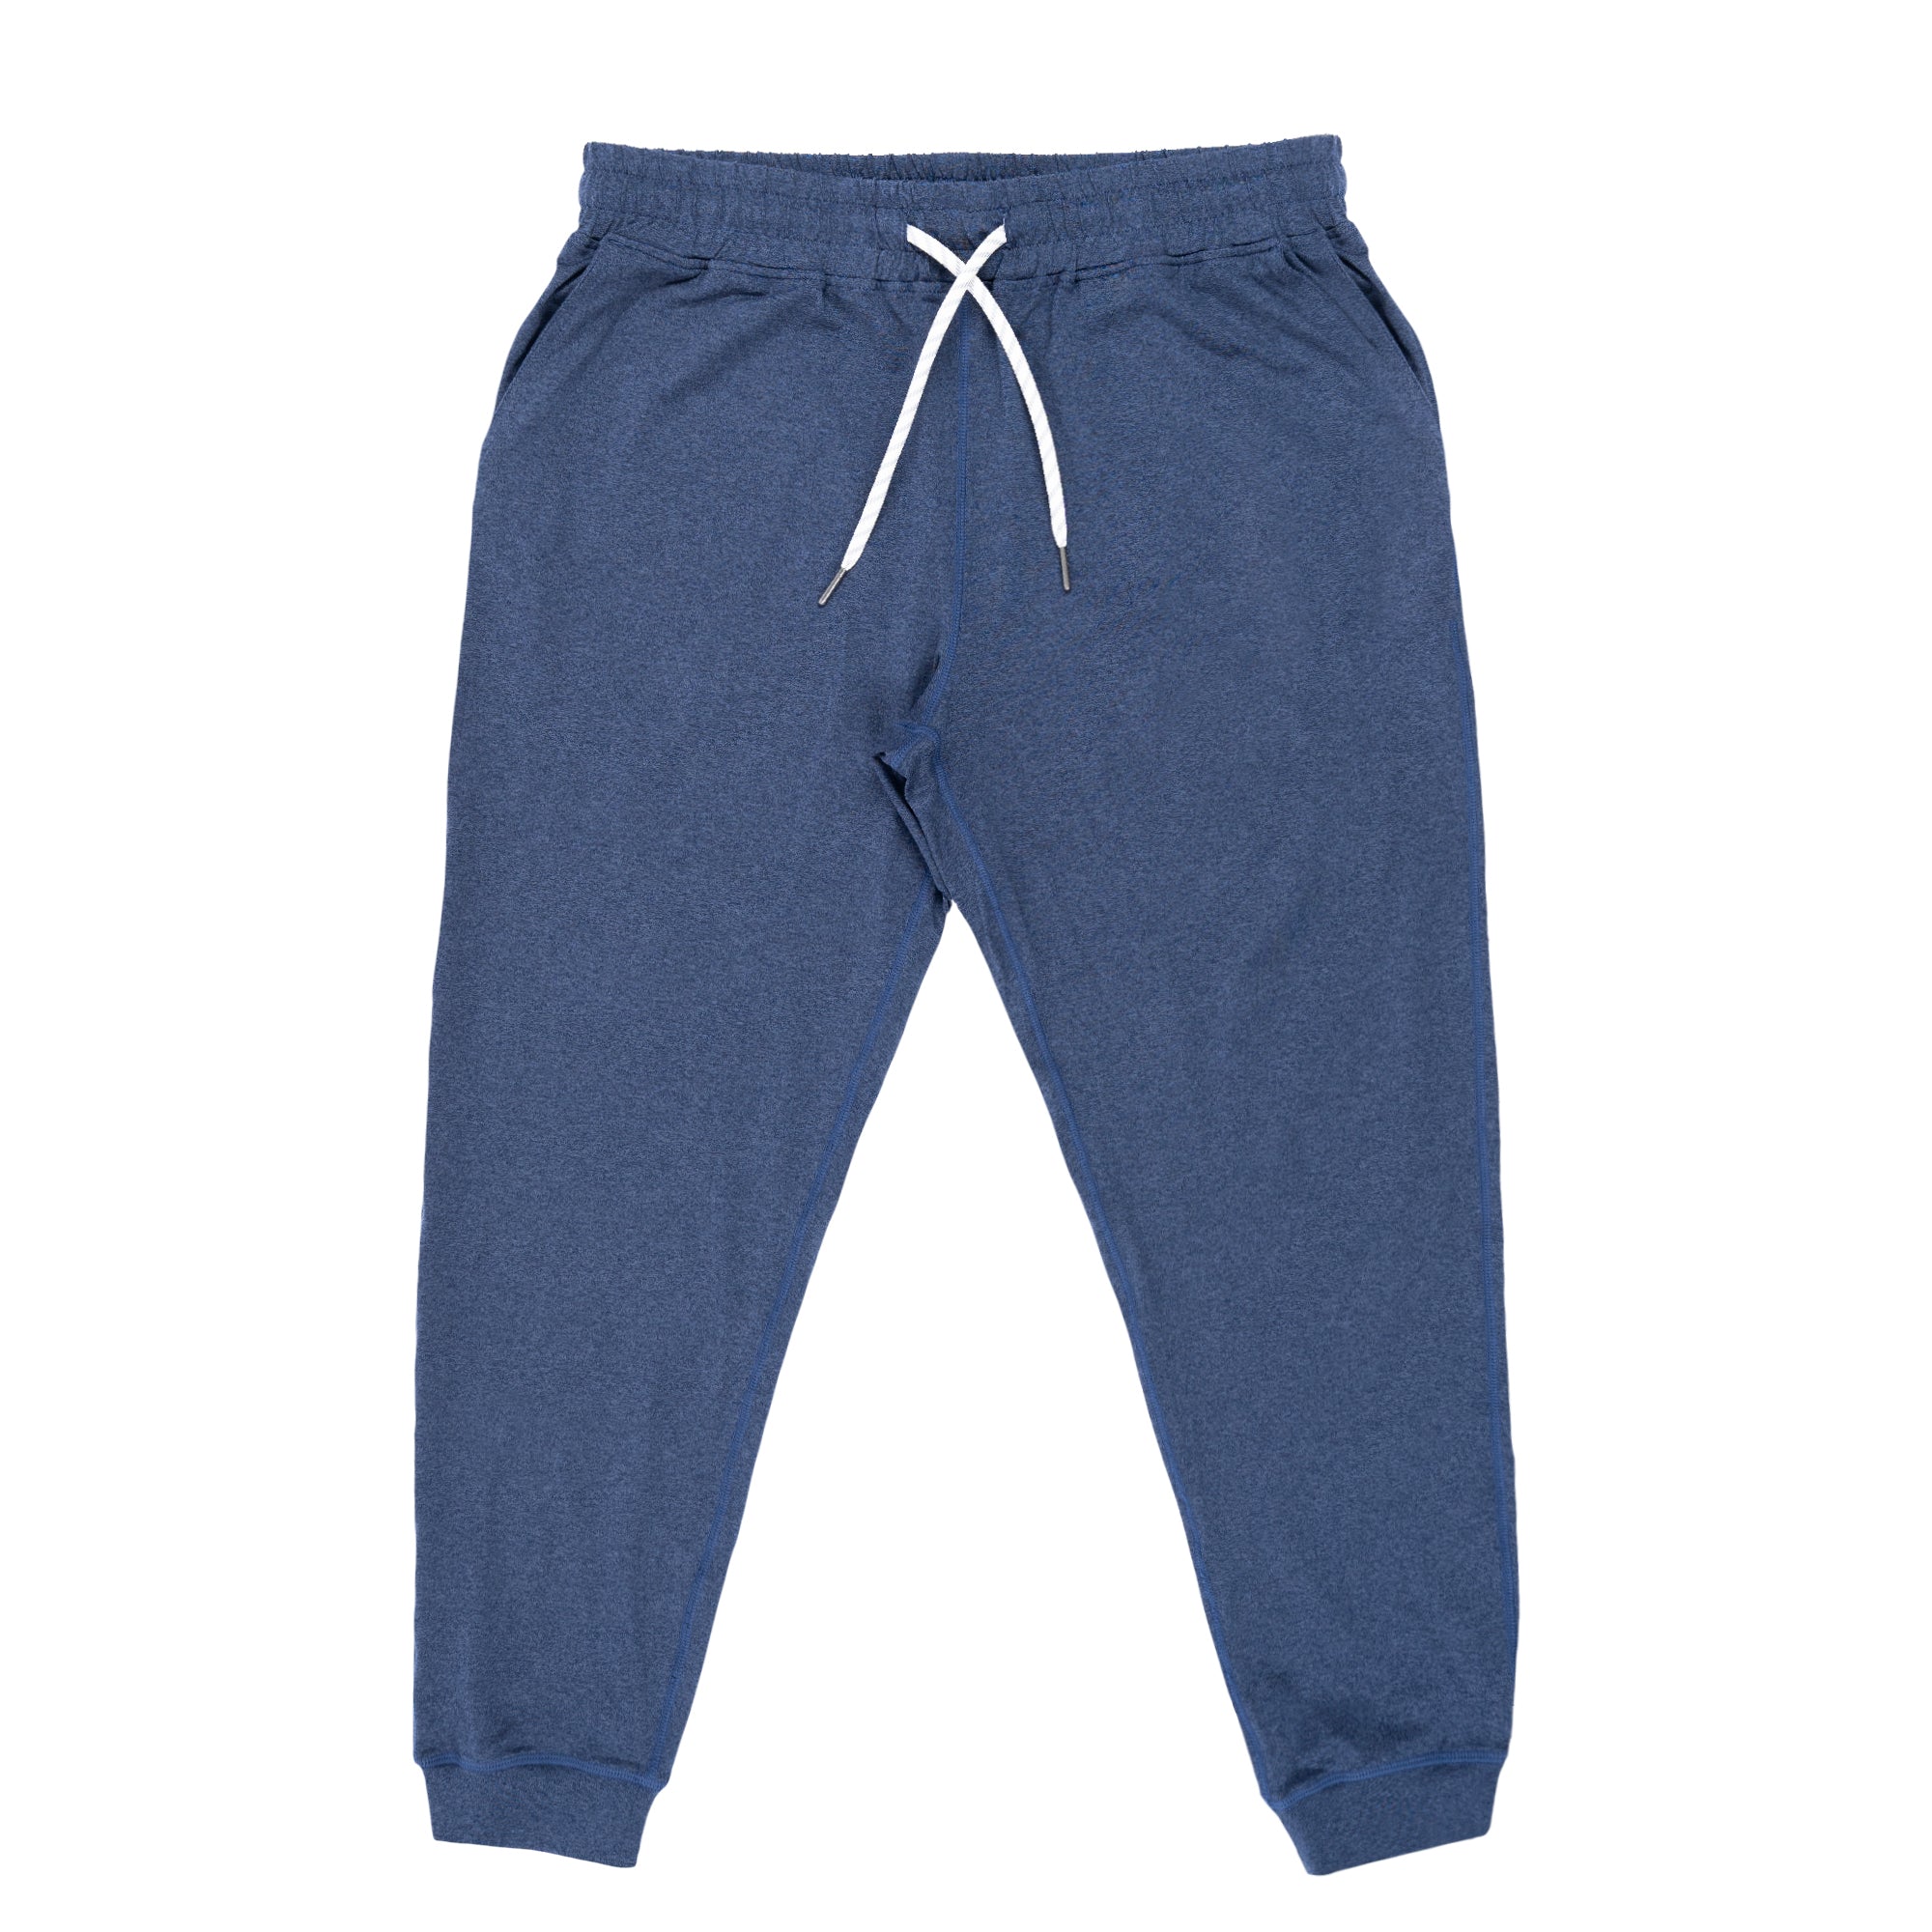 Buy heather-ink-blue LADIES DAWN TO DUSK JOGGER